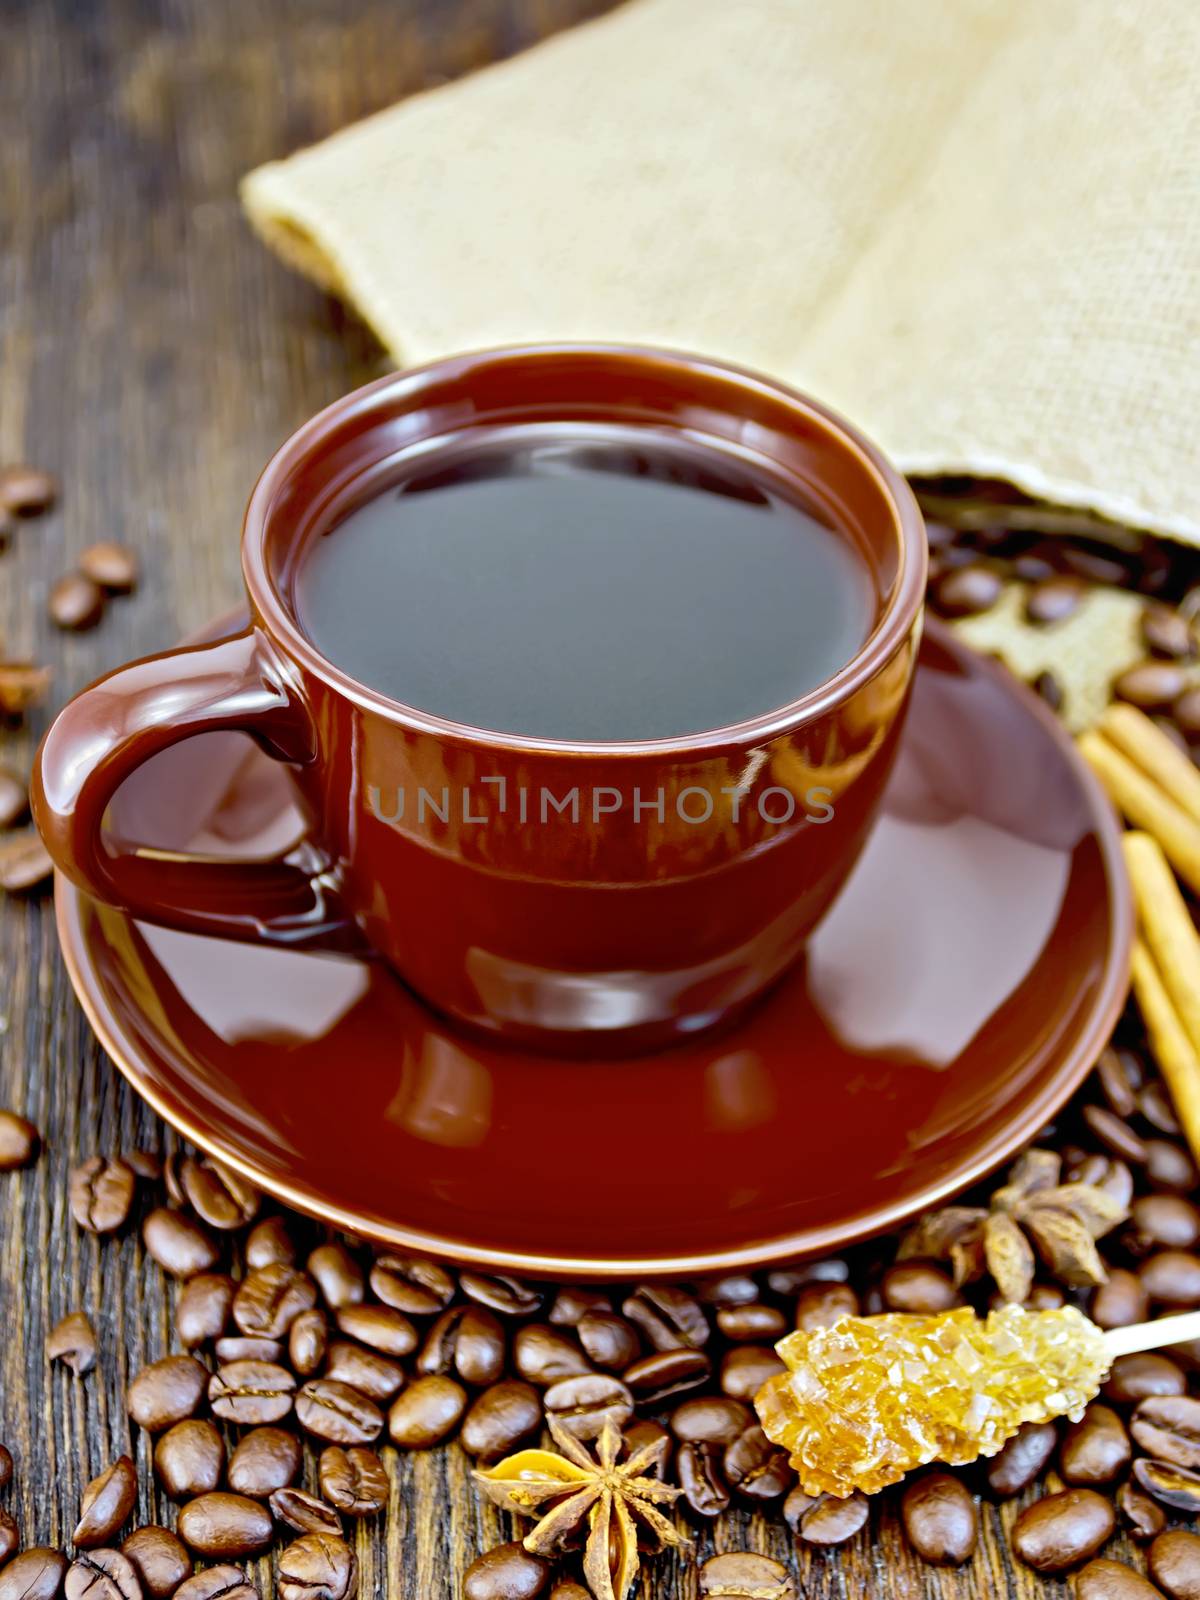 Coffee in cup brown with sugar, a bag of coffee beans, cinnamon sticks and star anise on a background of dark wood planks